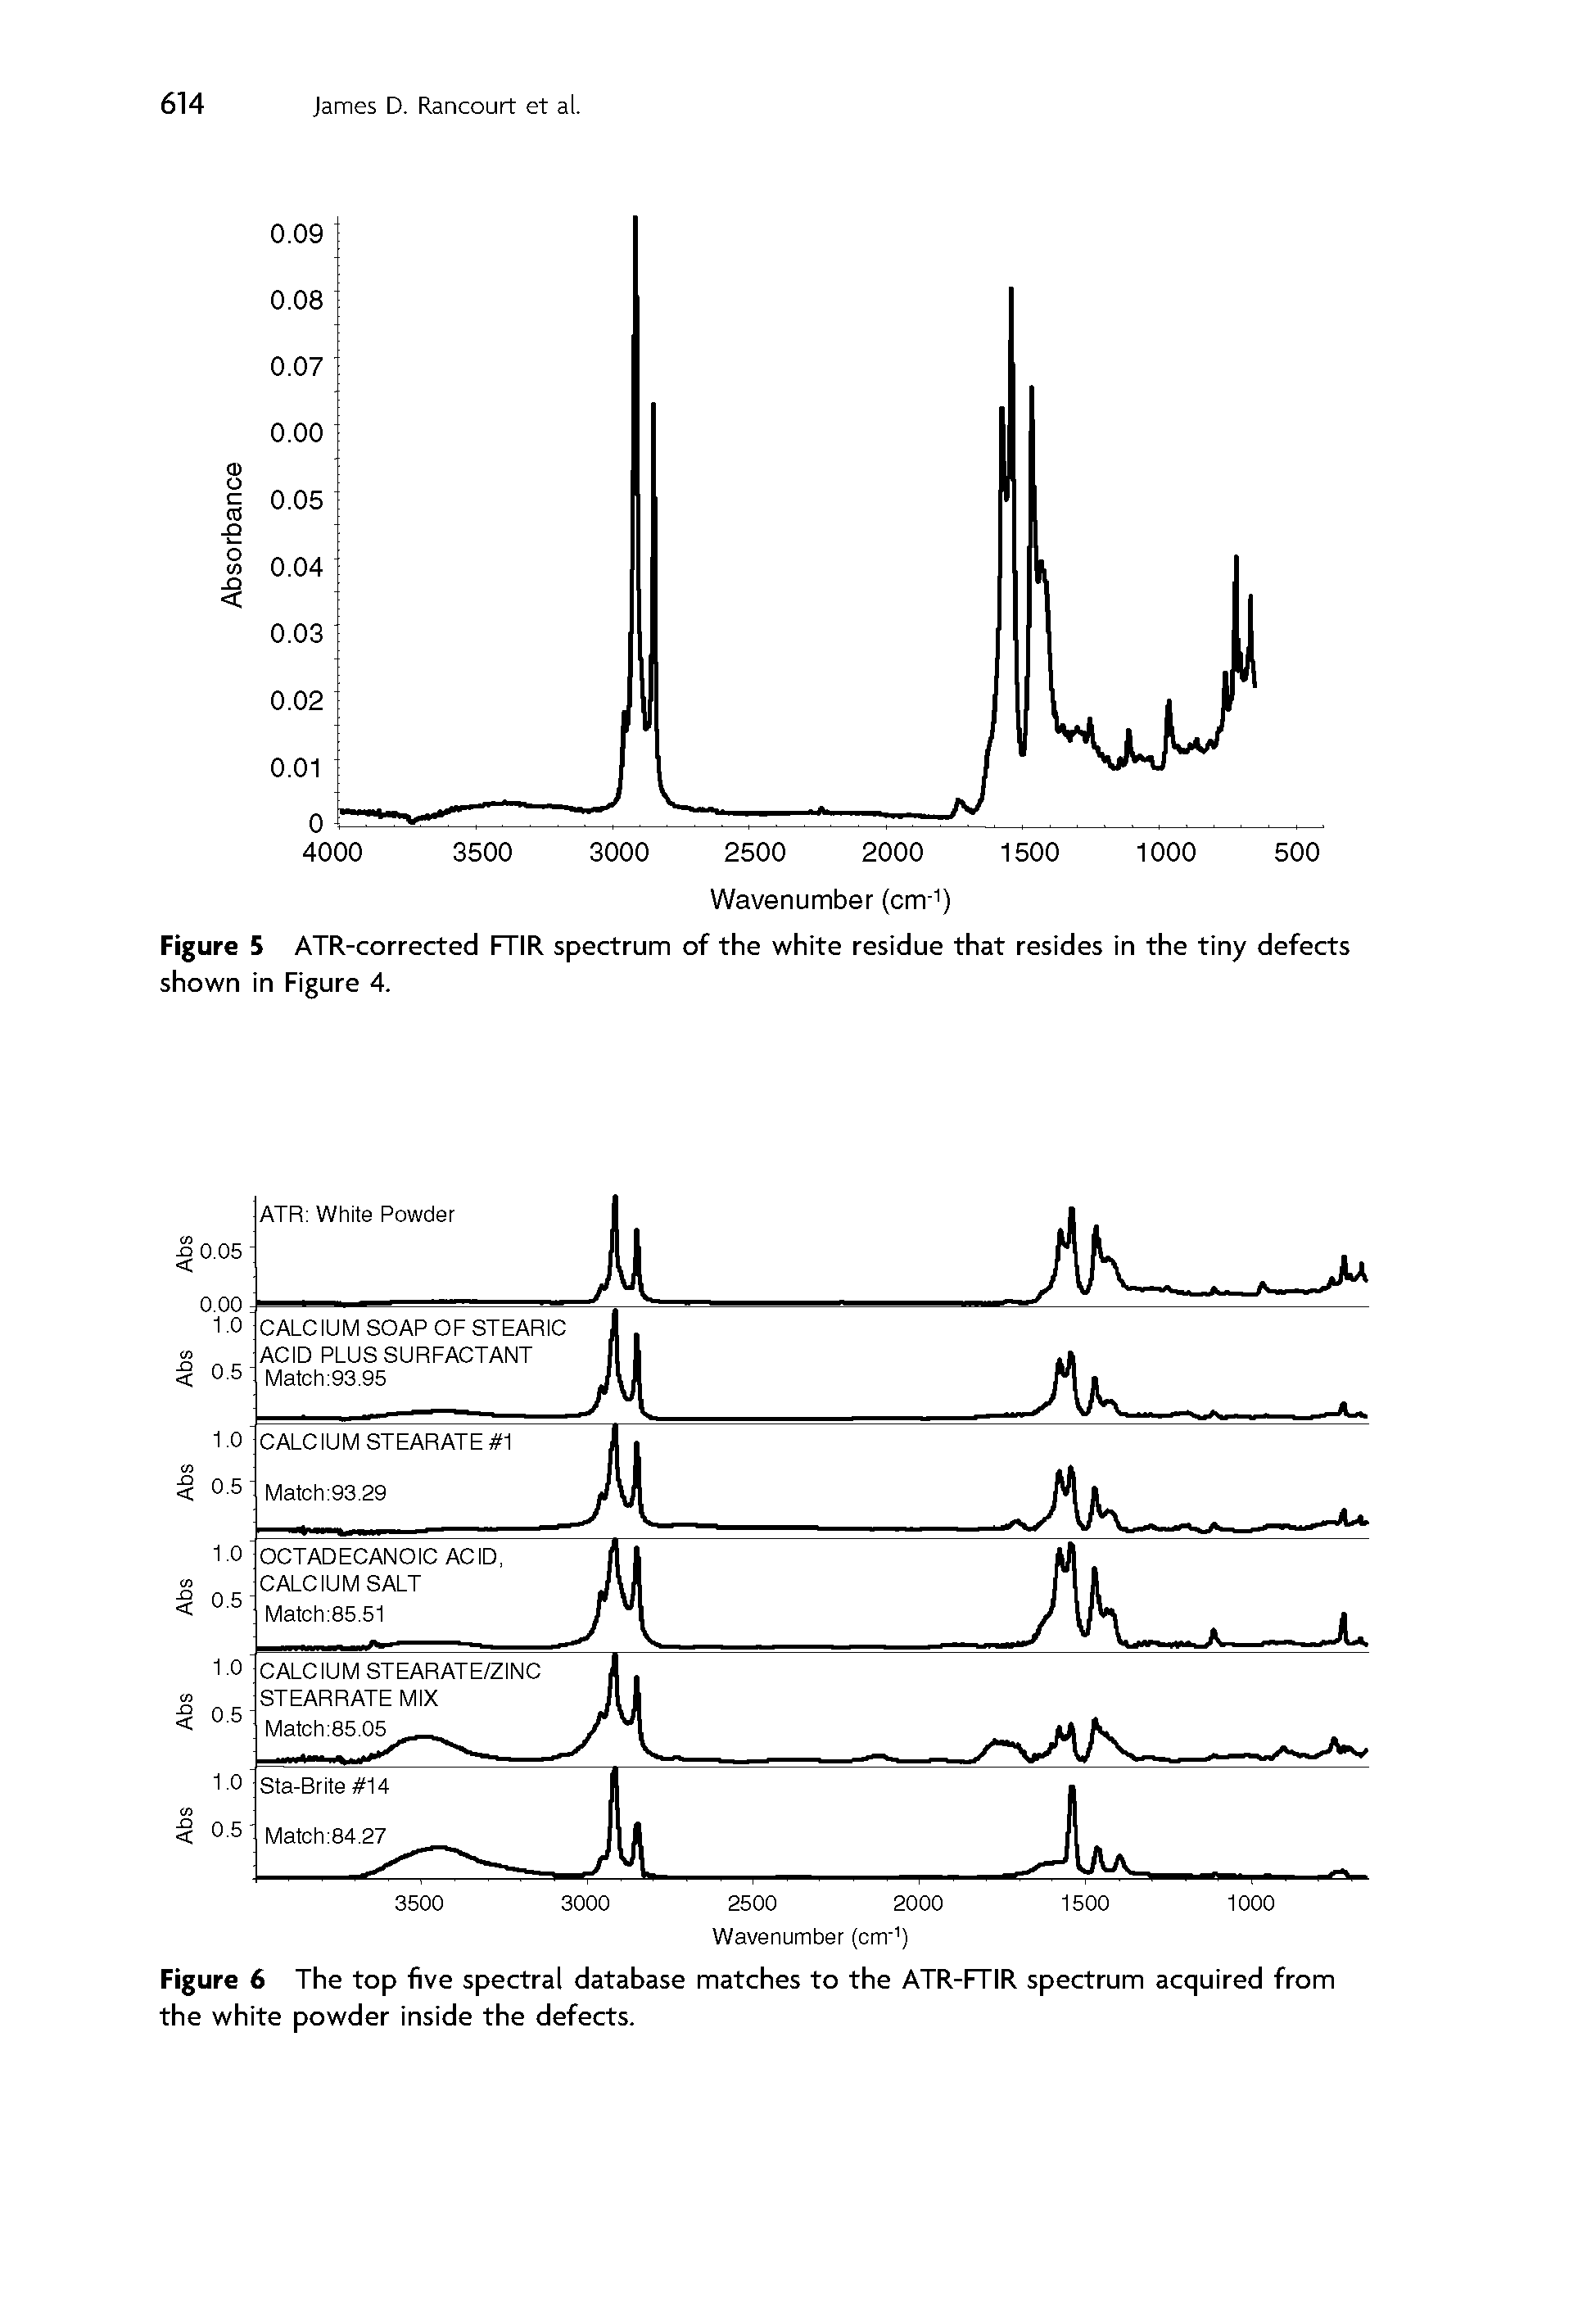 Figure 6 The top five spectral database matches to the ATR-FTIR spectrum acquired from the white powder inside the defects.